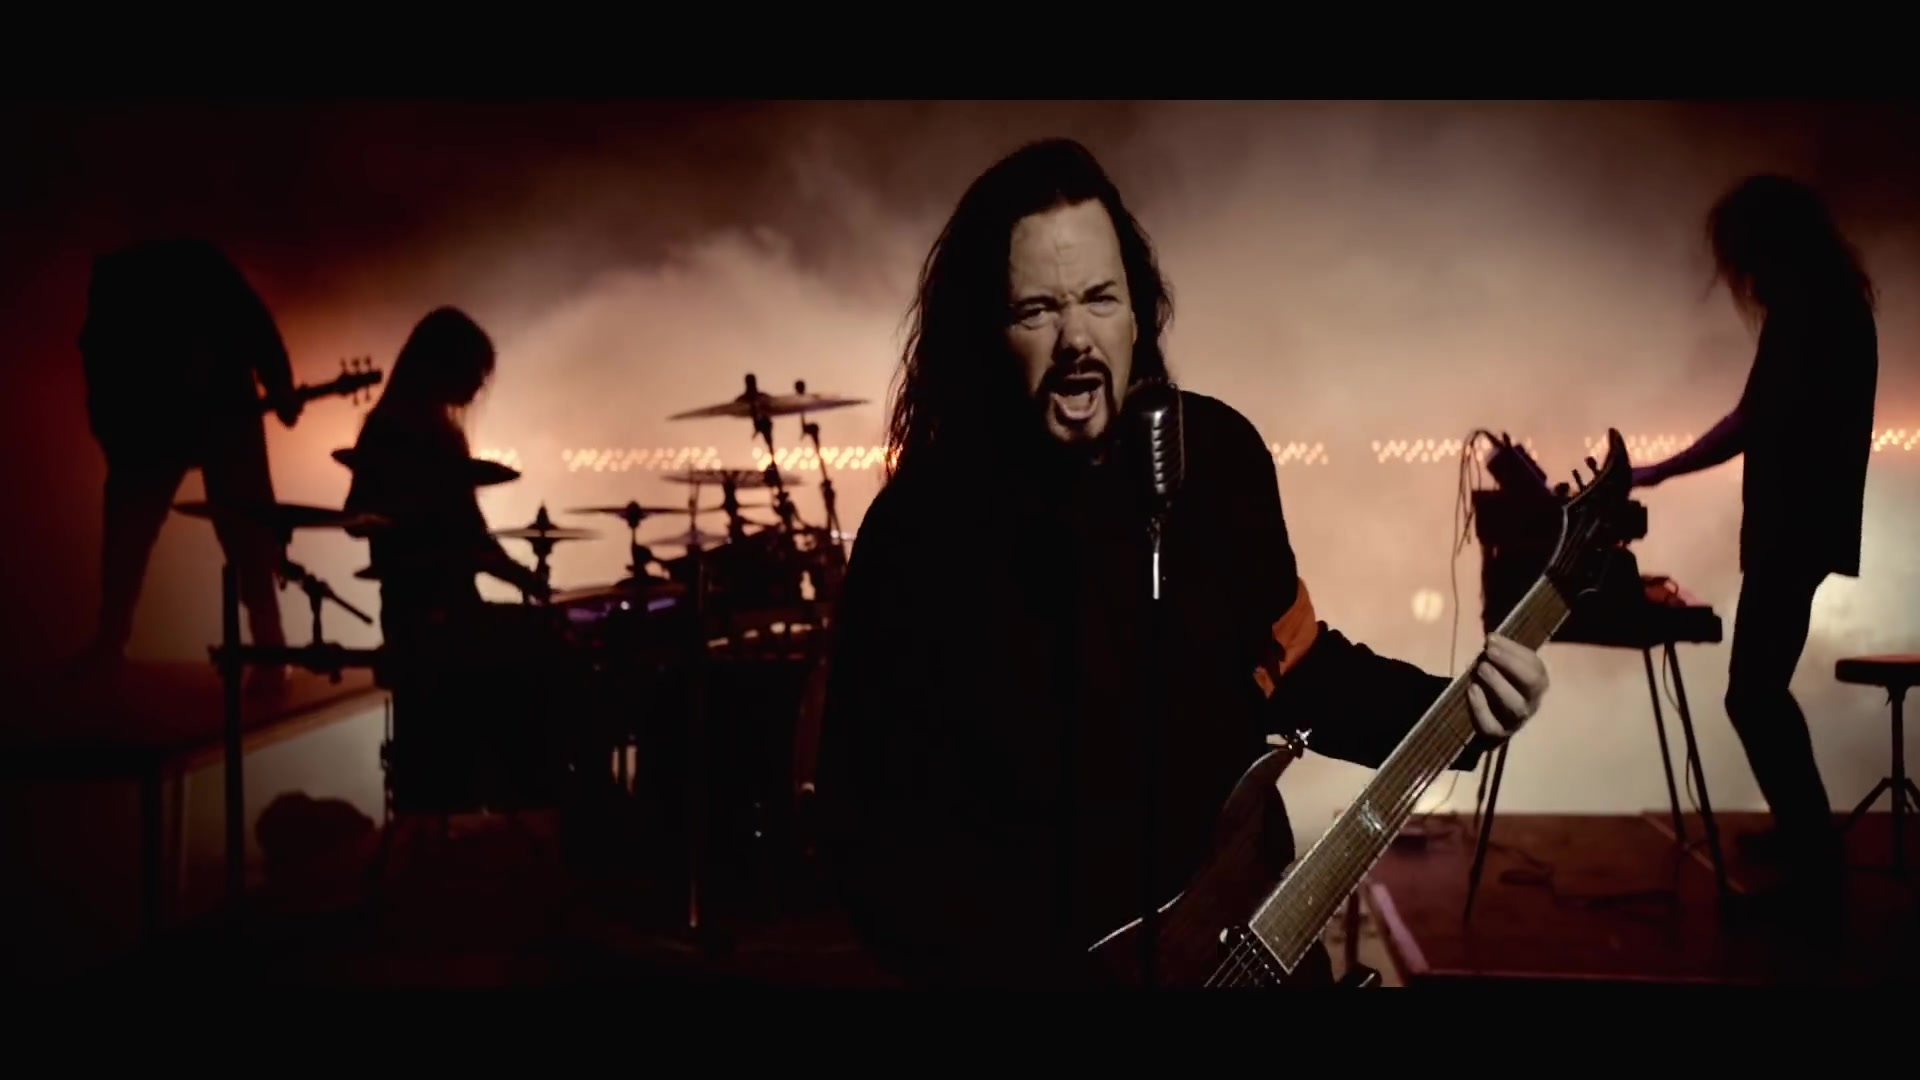 Evergrey - Where August Mourns